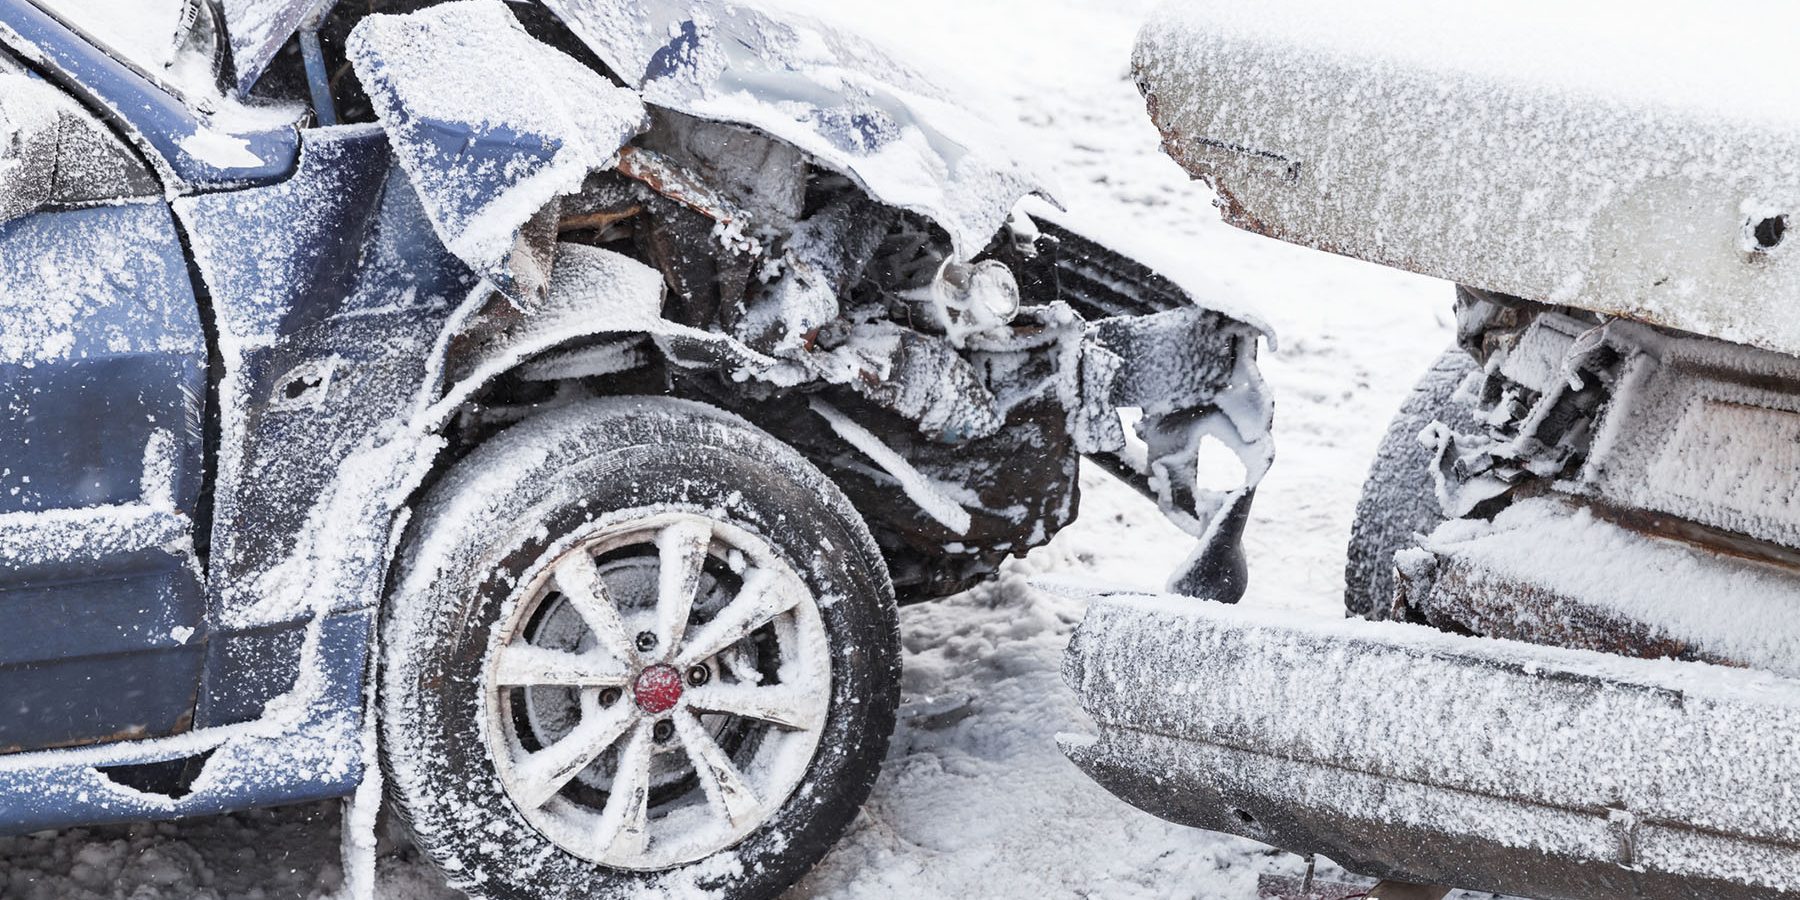 Road Traffic Accident (RTA) Investigation | Crashed cars right after an accident on winter road with snow | Crash Detectives Ltd